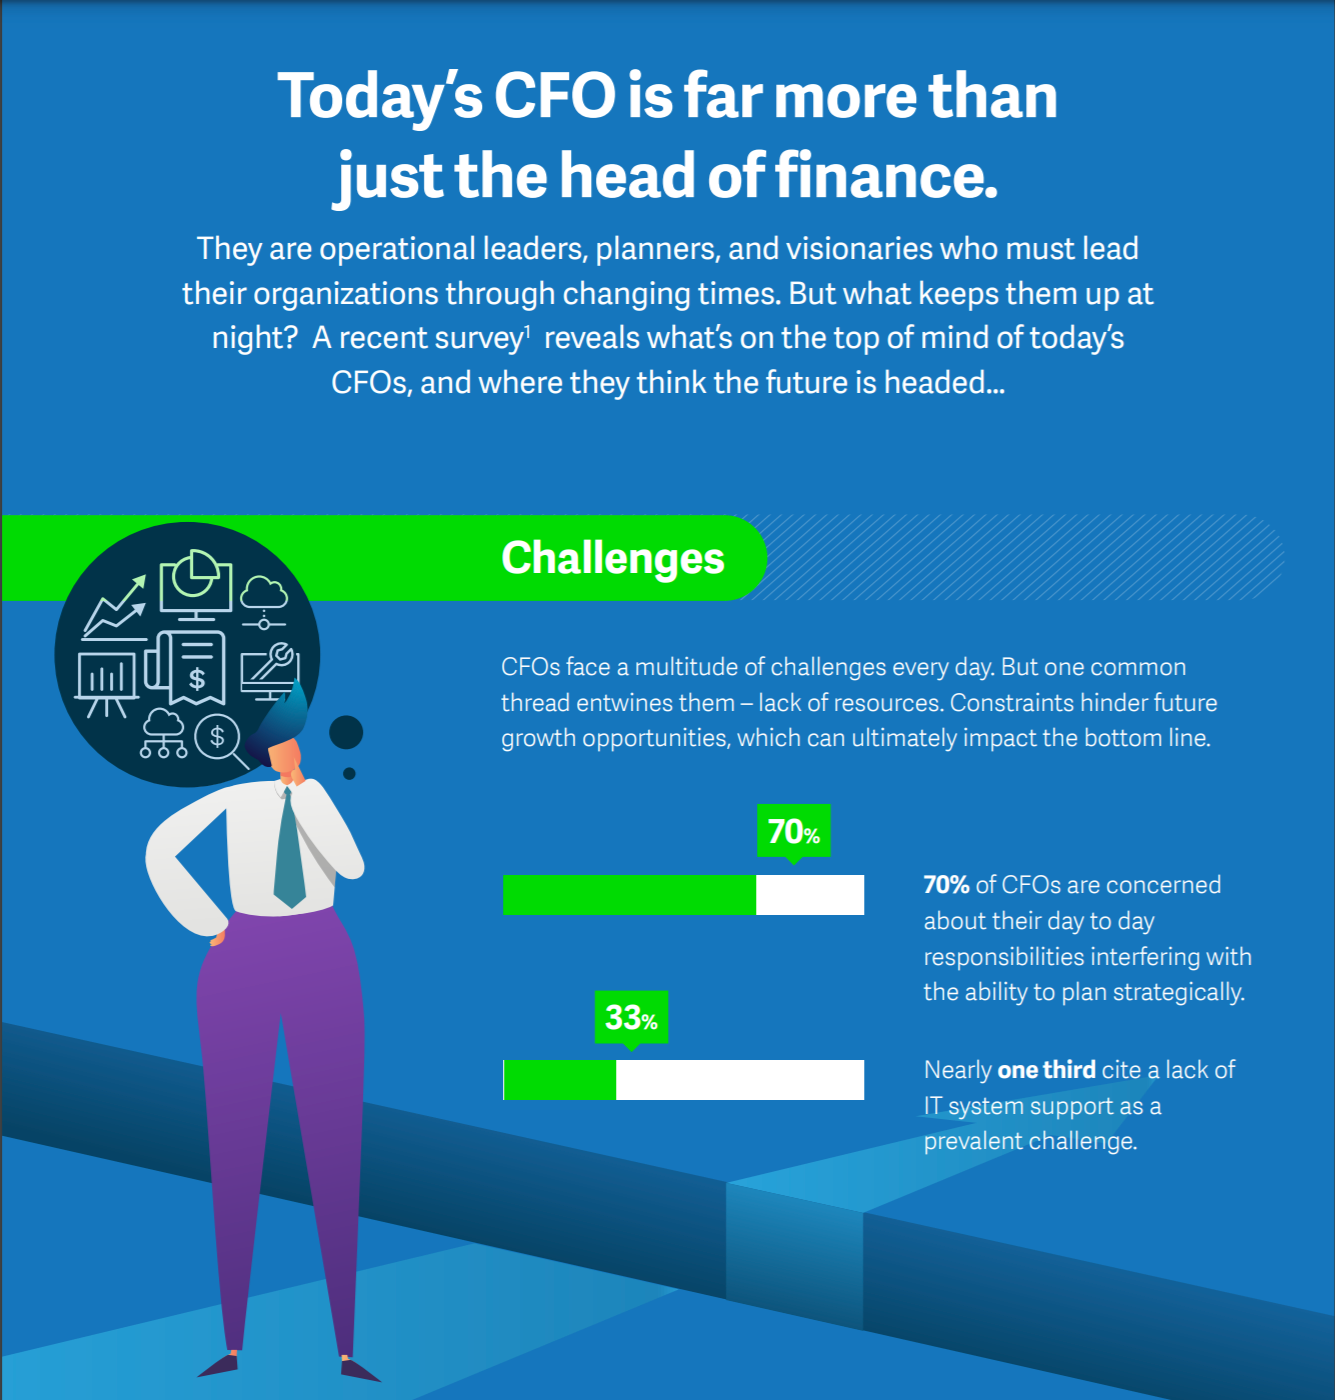 Today’s CFO is far more than just the head of finance